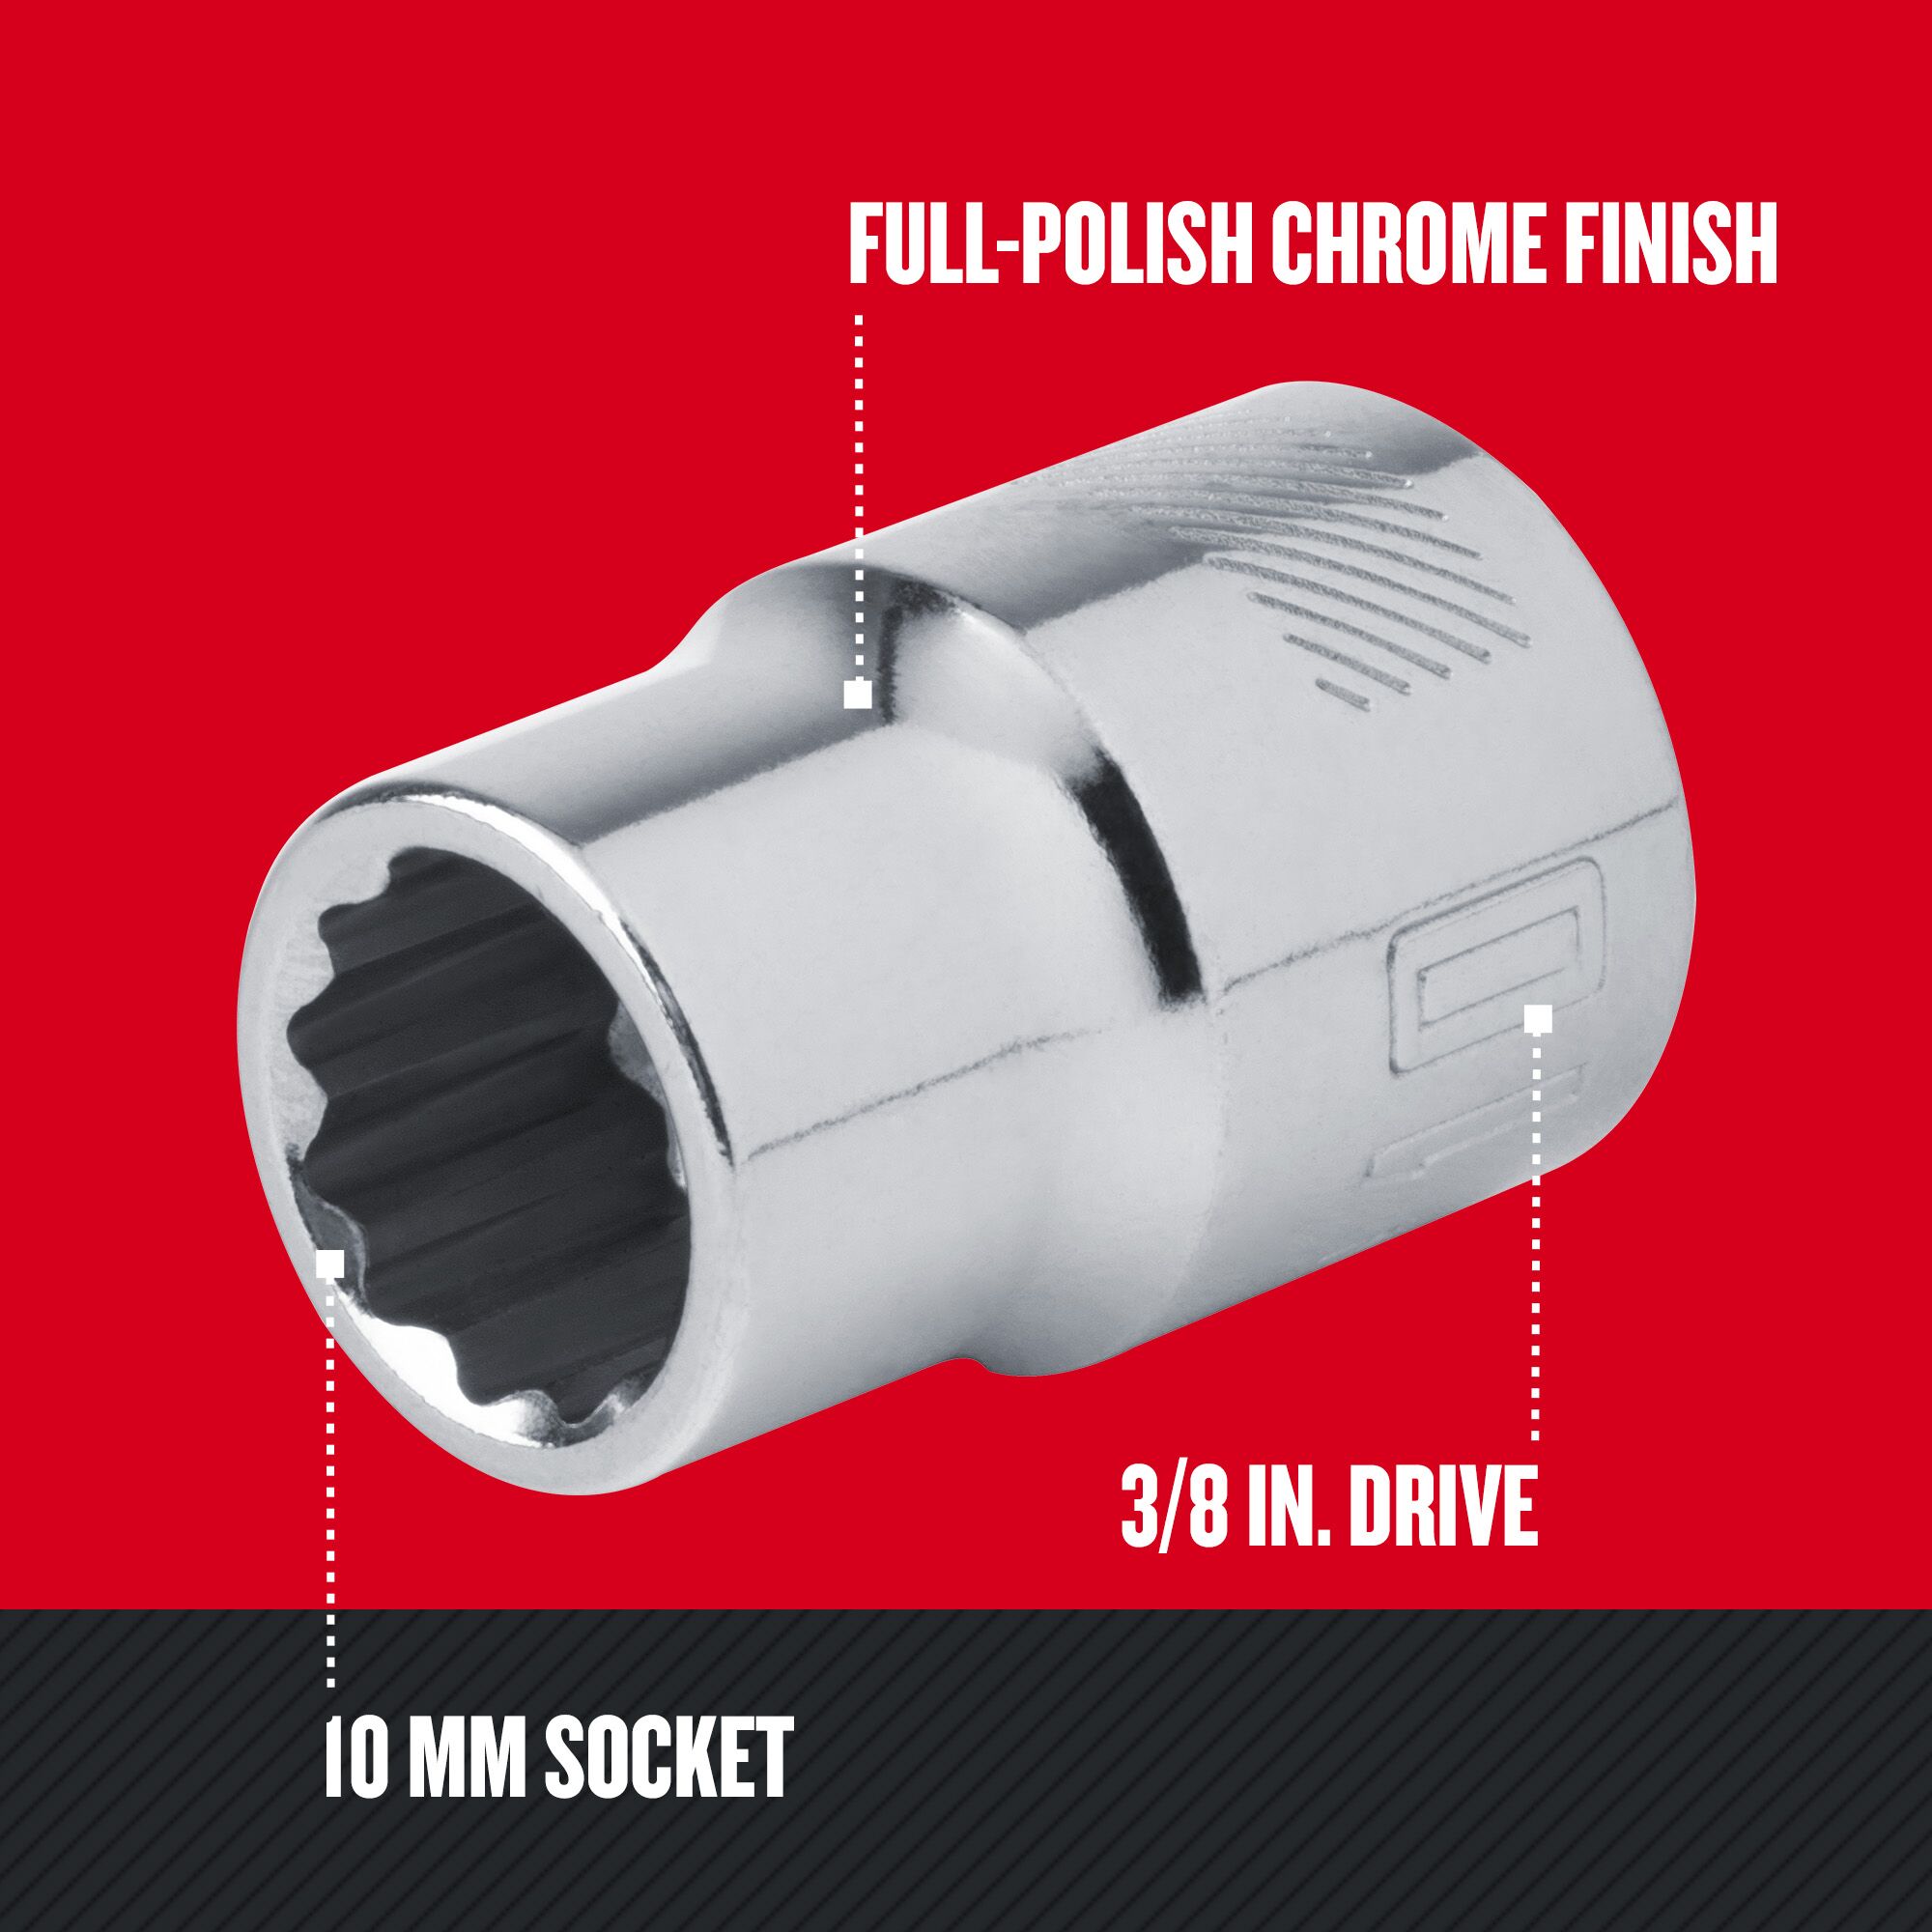 Graphic of CRAFTSMAN Sockets: 12-Point highlighting product features